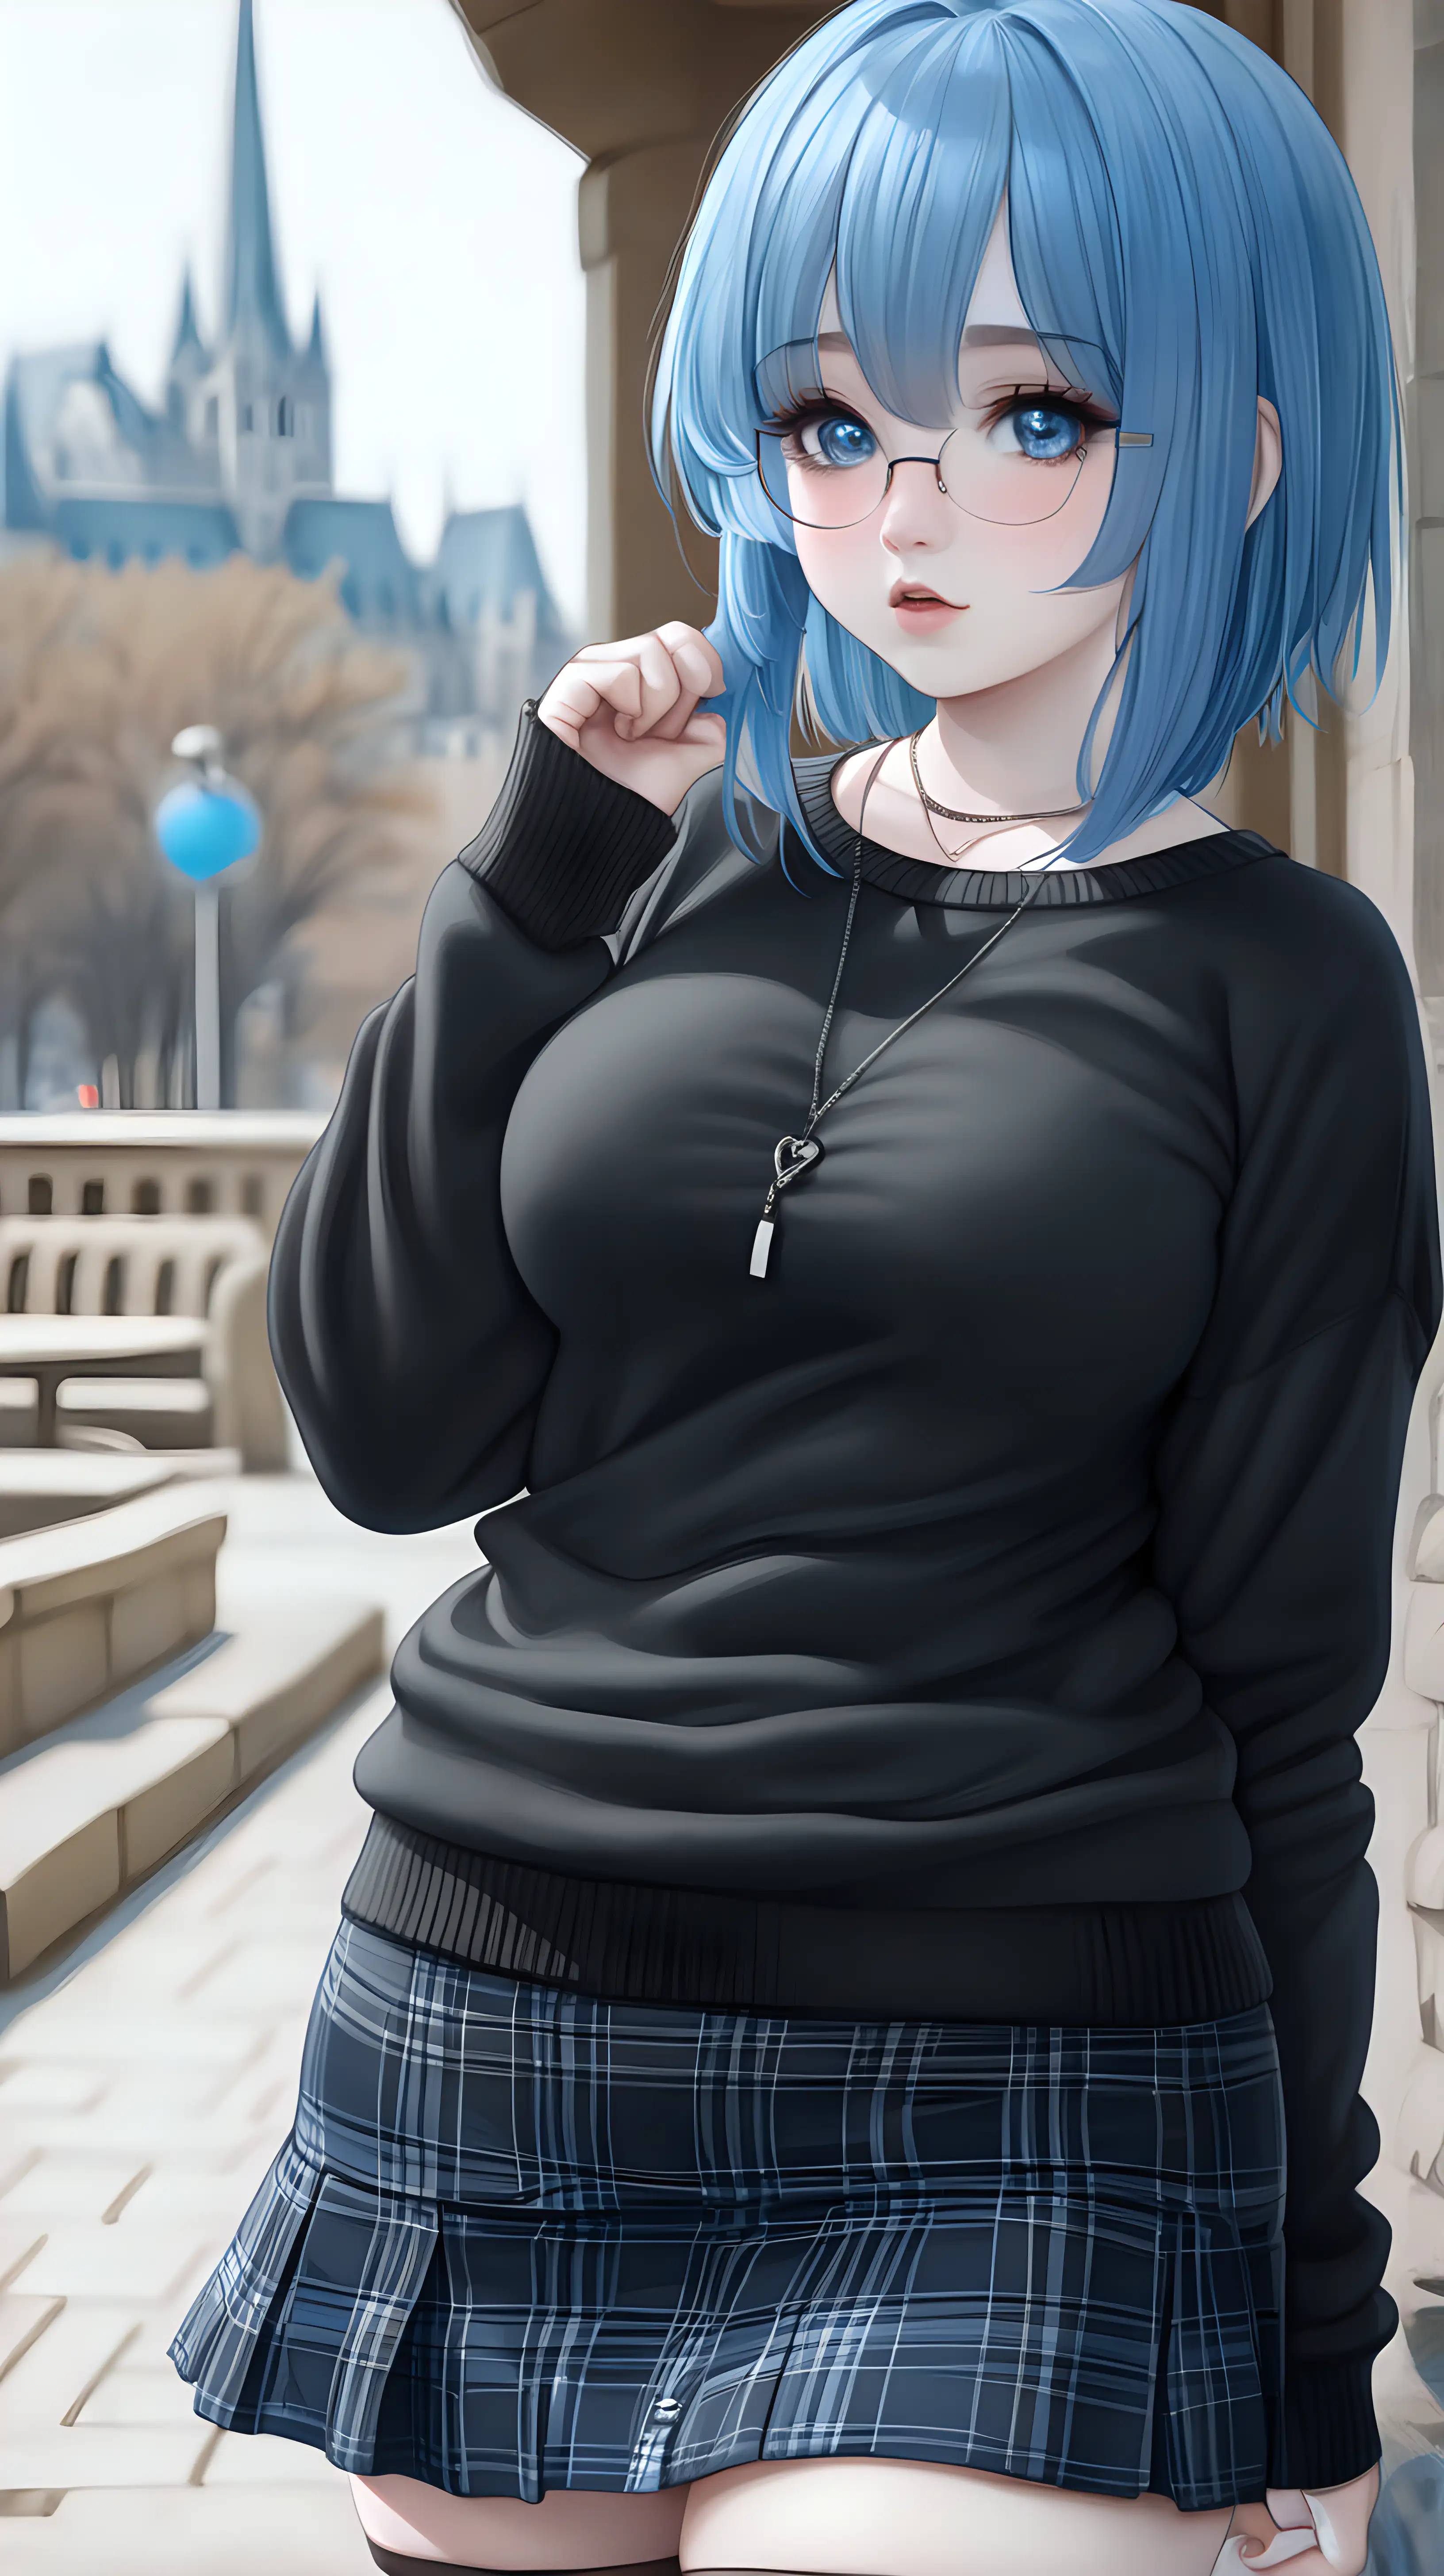 girl, blue hair, pale skin, plad skirt, short skirt, very chubby, black sweater, tight clothes